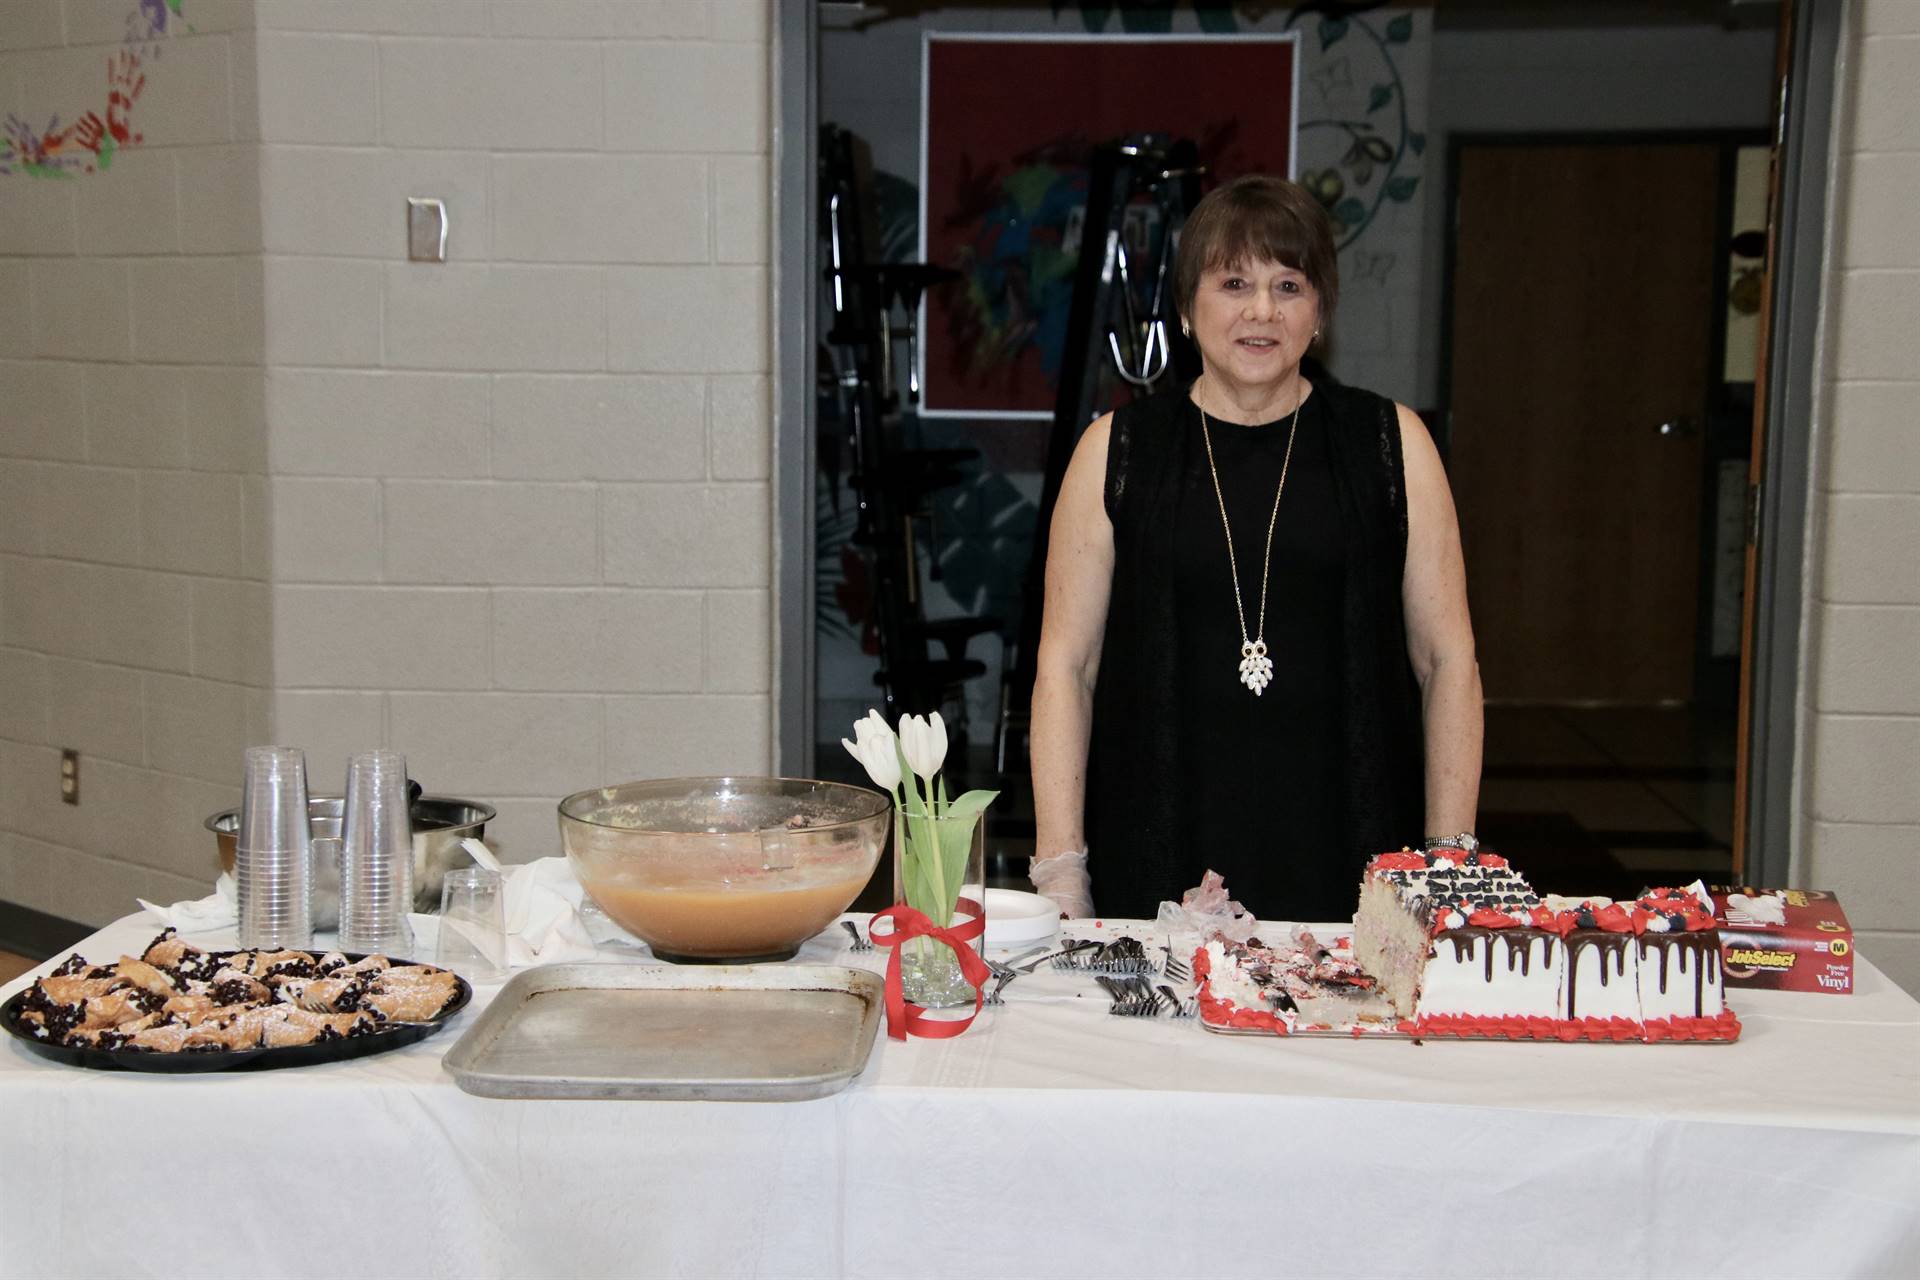 Desserts and cake for honorees